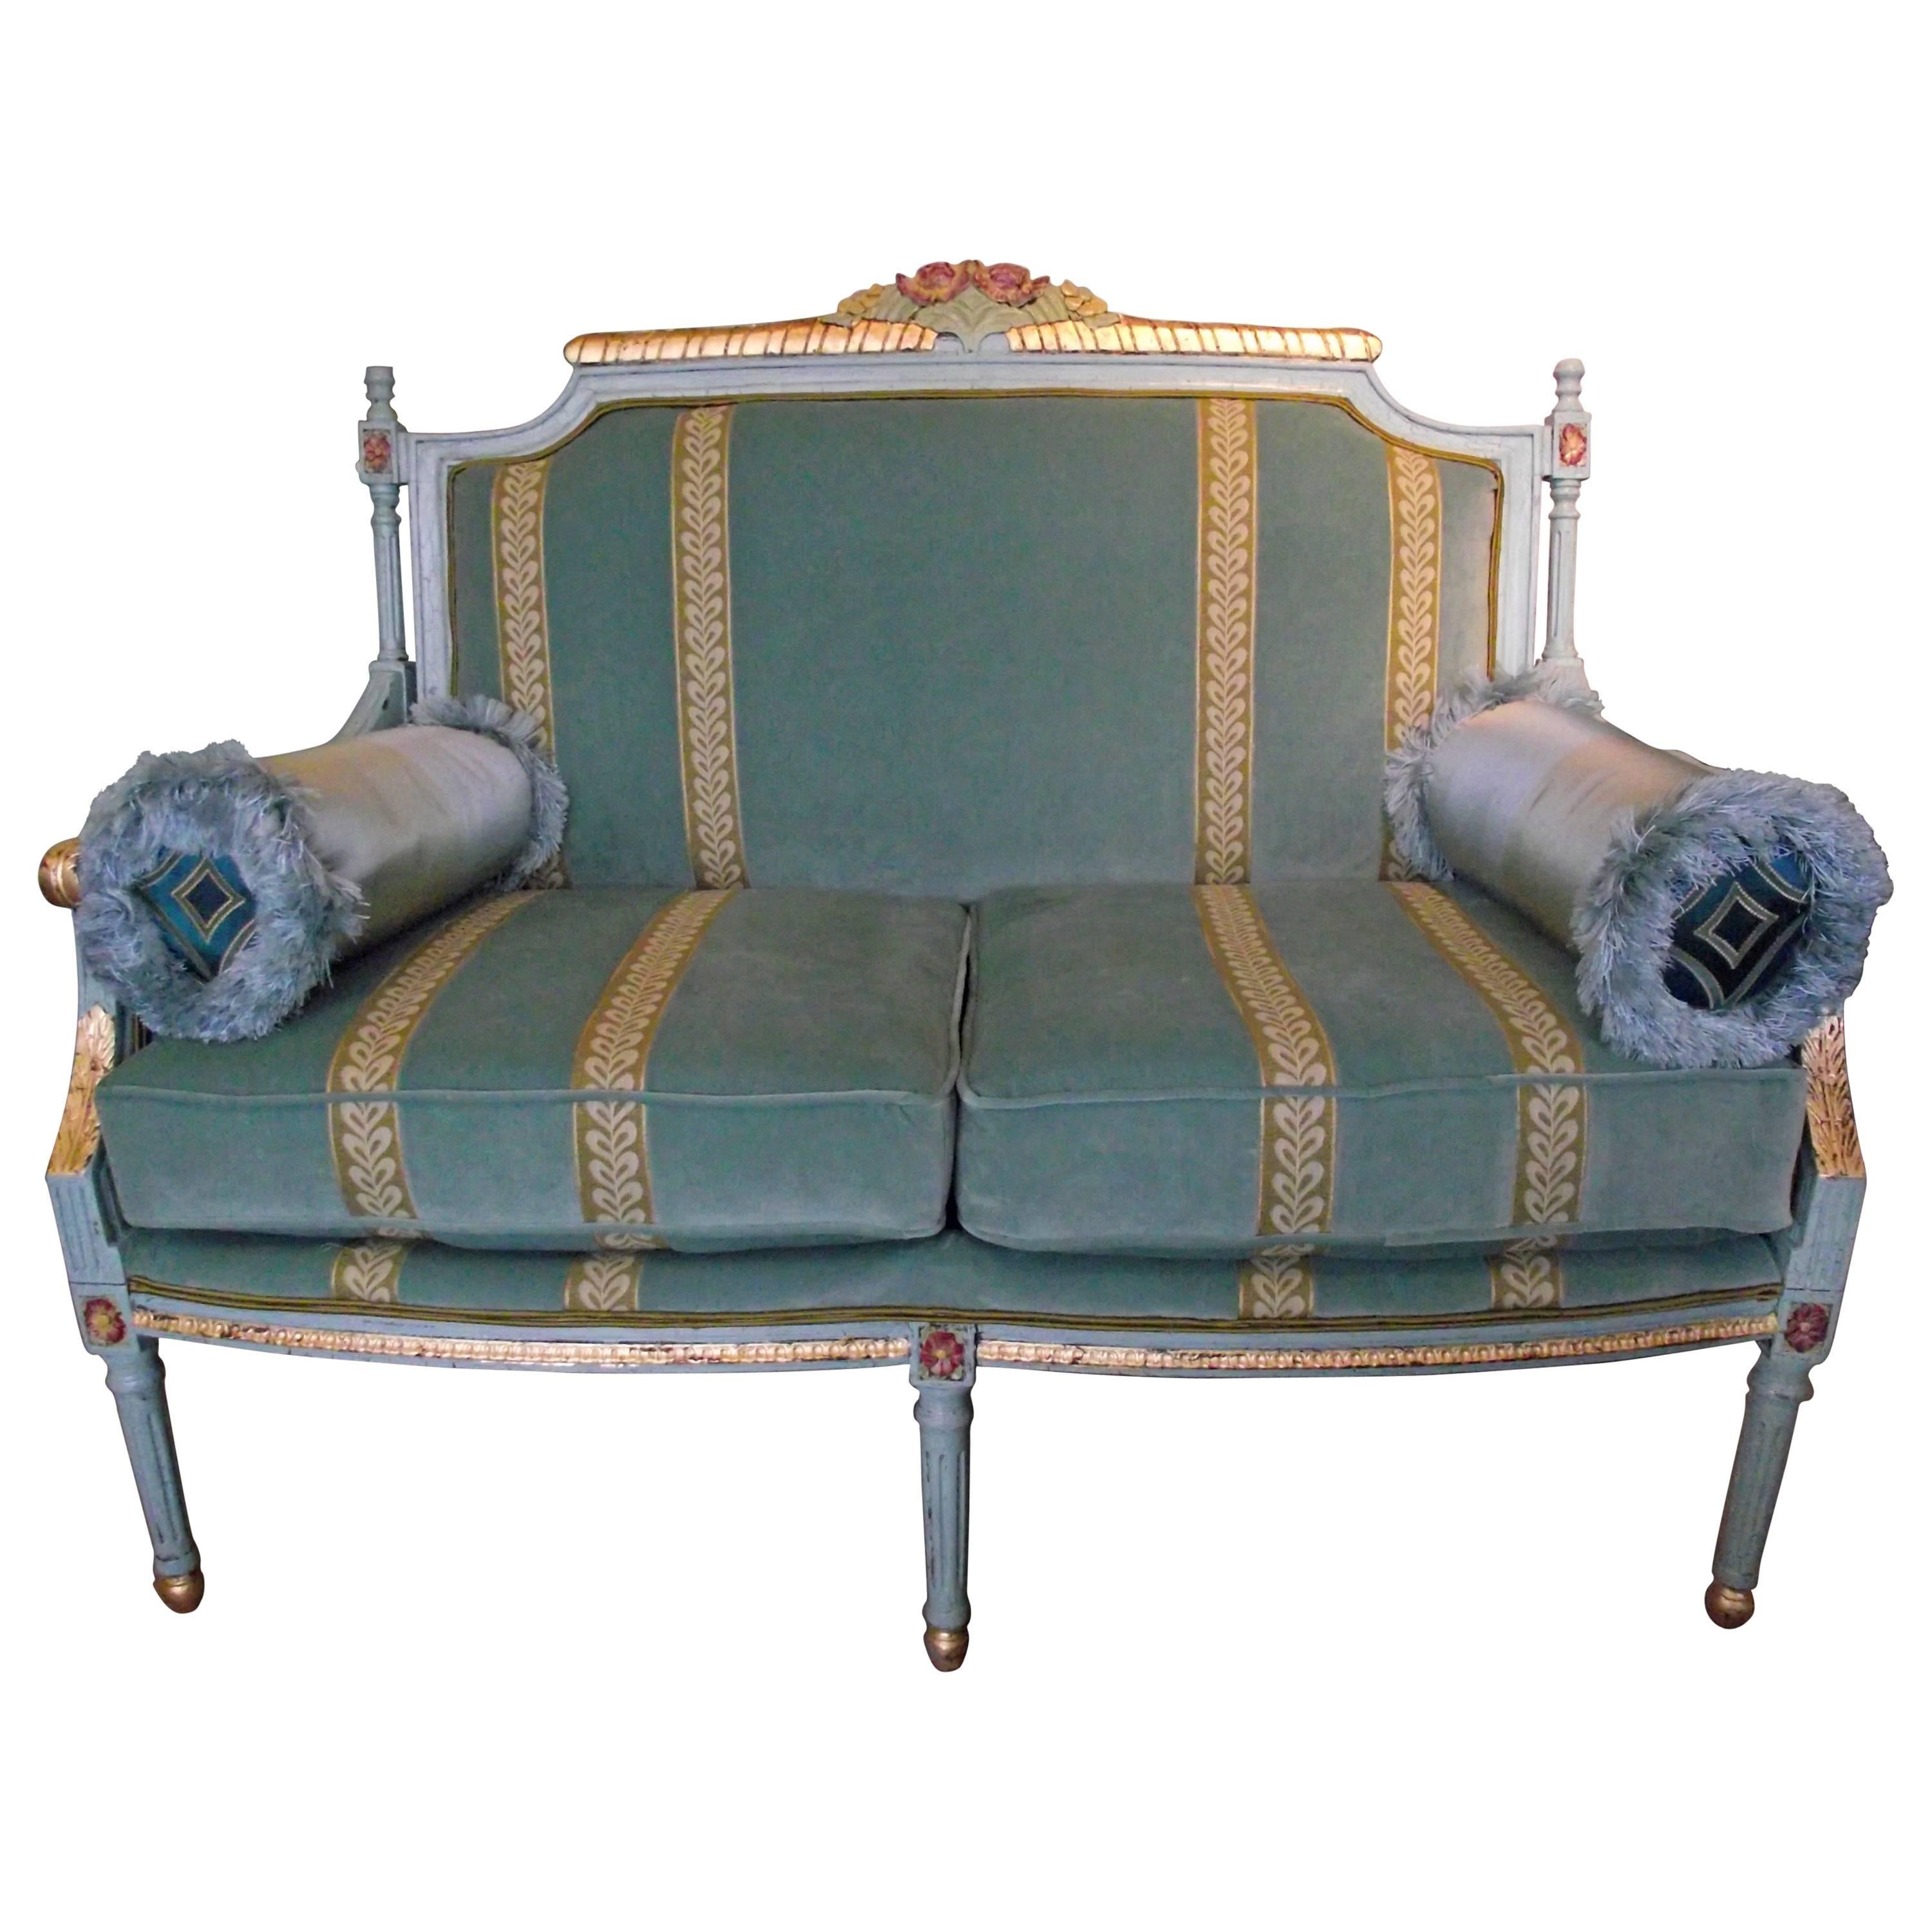 Georgian Style Settee with Gold Leaf Accents